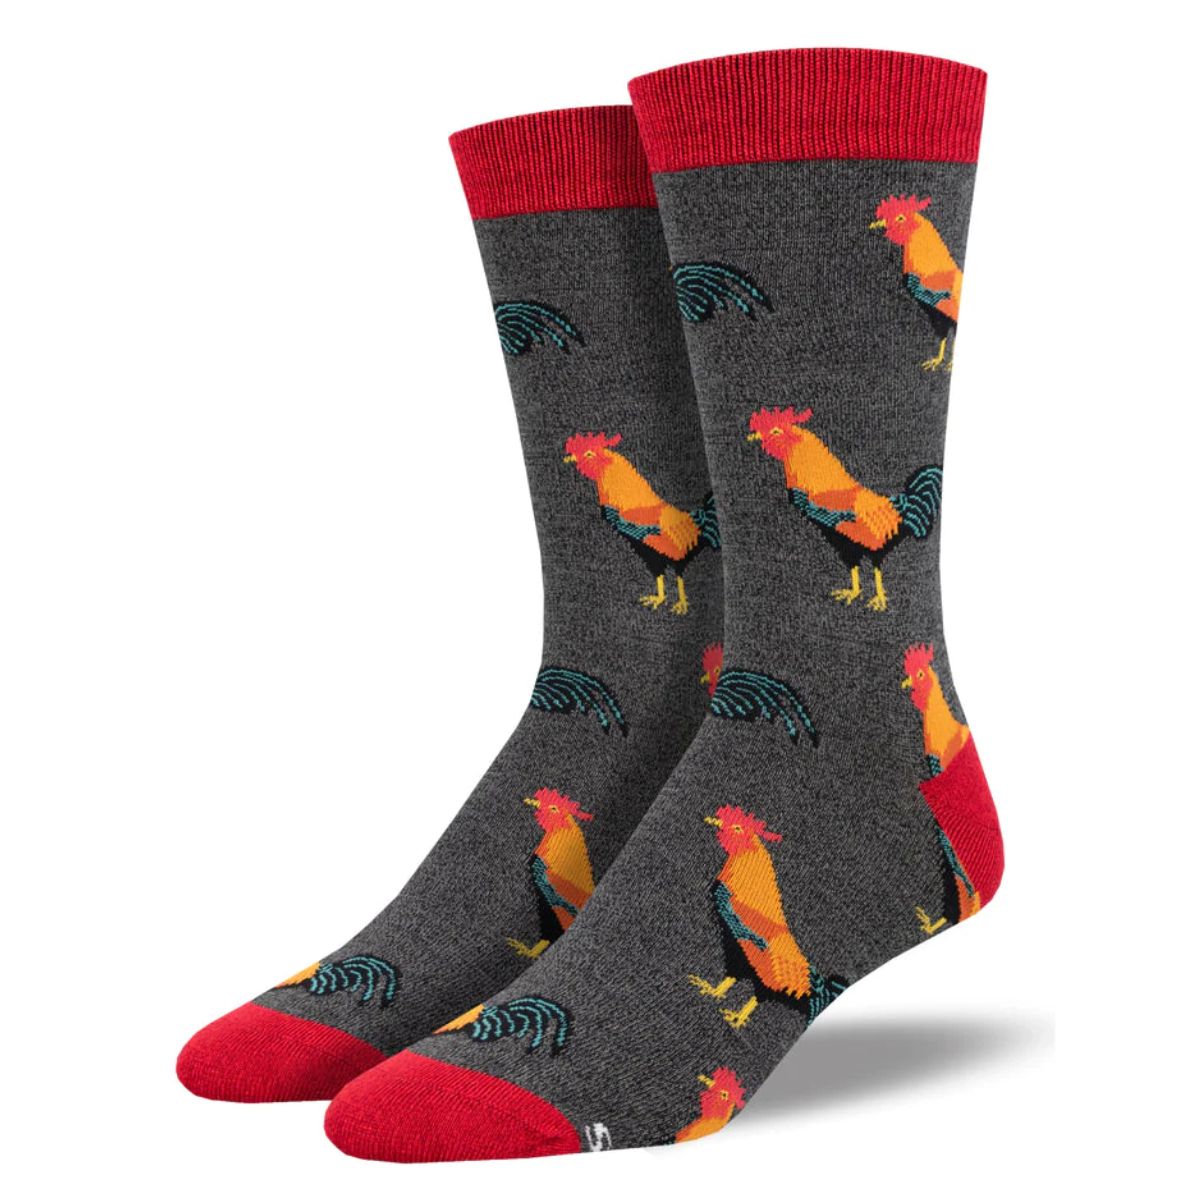 Flock of roosters socks a pair of charcoal grey crew socks with rooster print